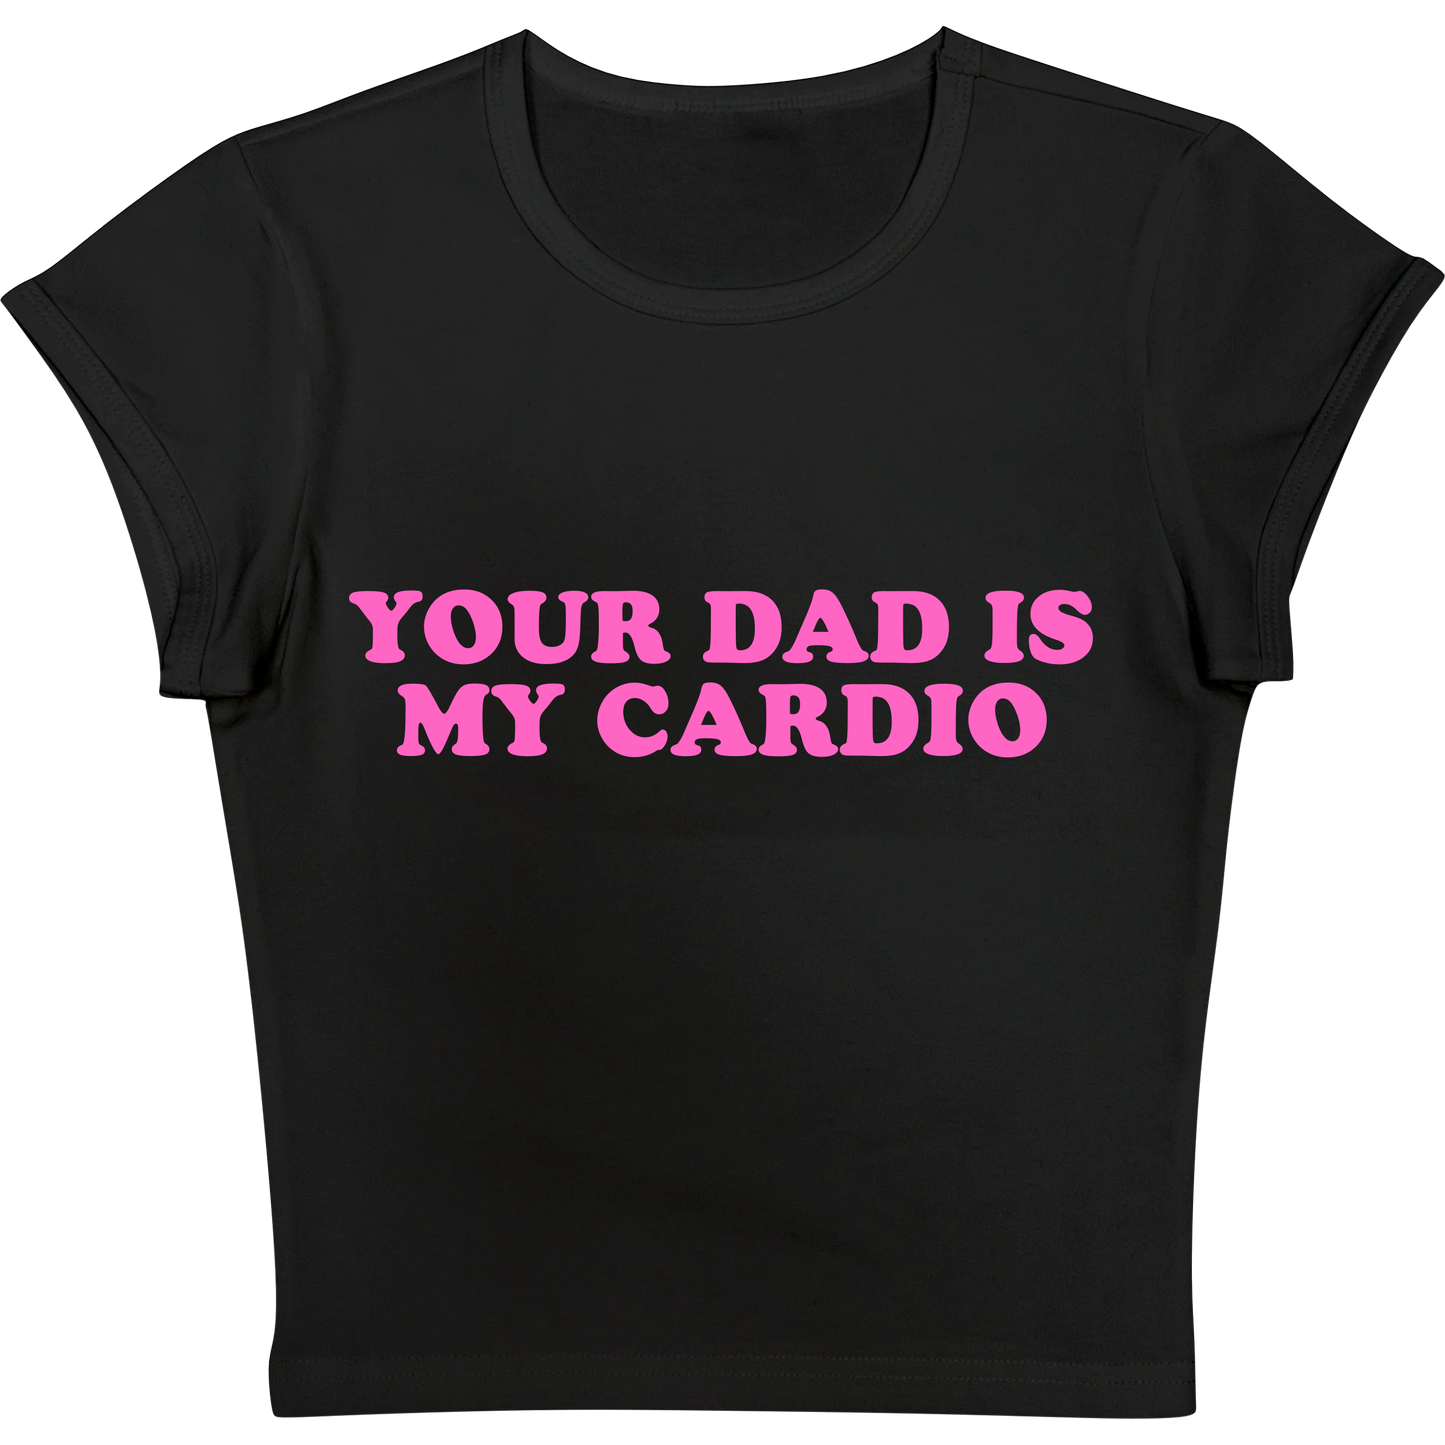 Your Dad is my Cardio Black Baby tee